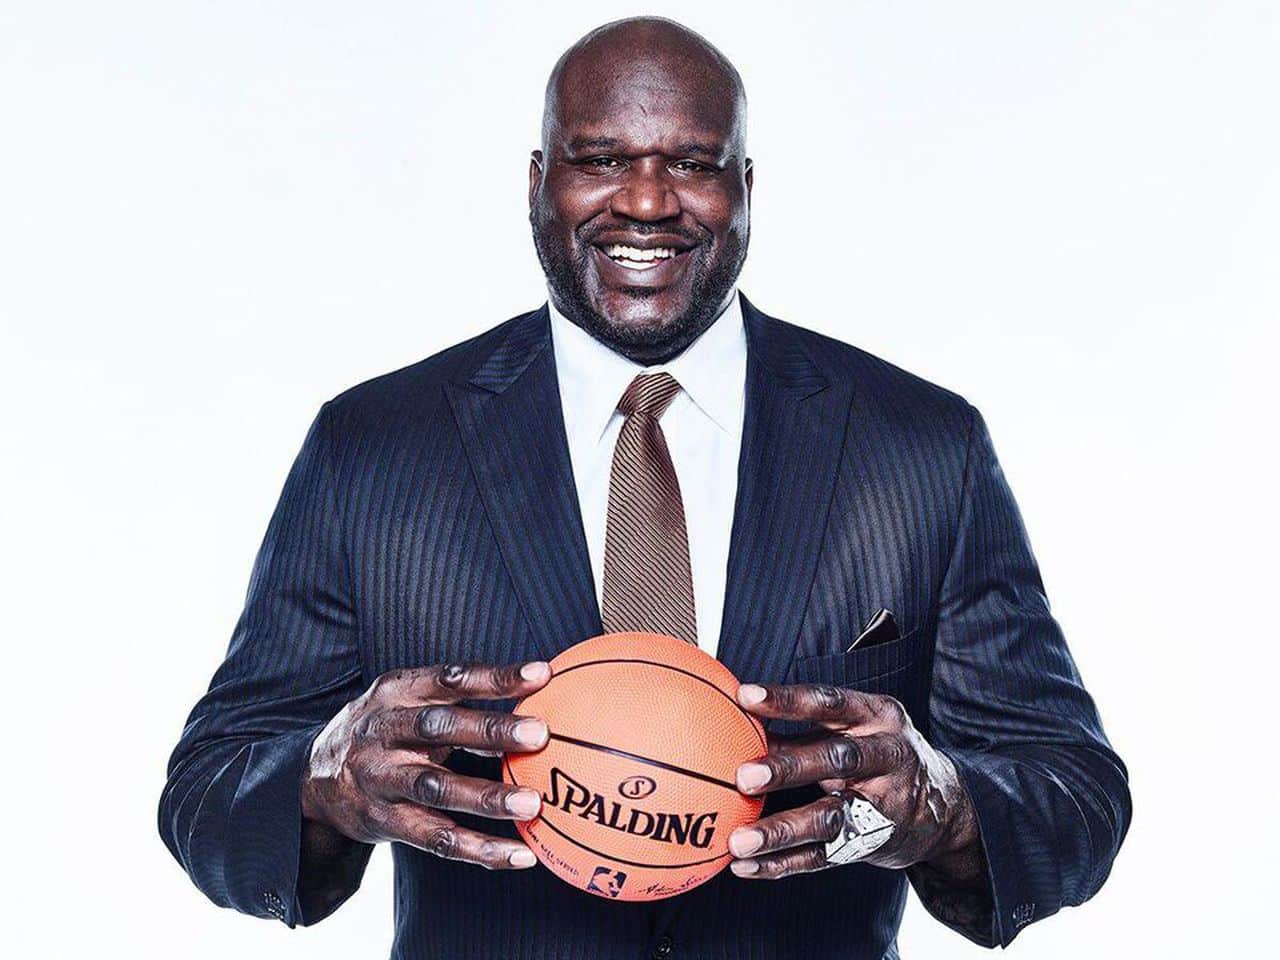 Shaq Net Worth 2022: How much is Shaquille O'Neal worth?